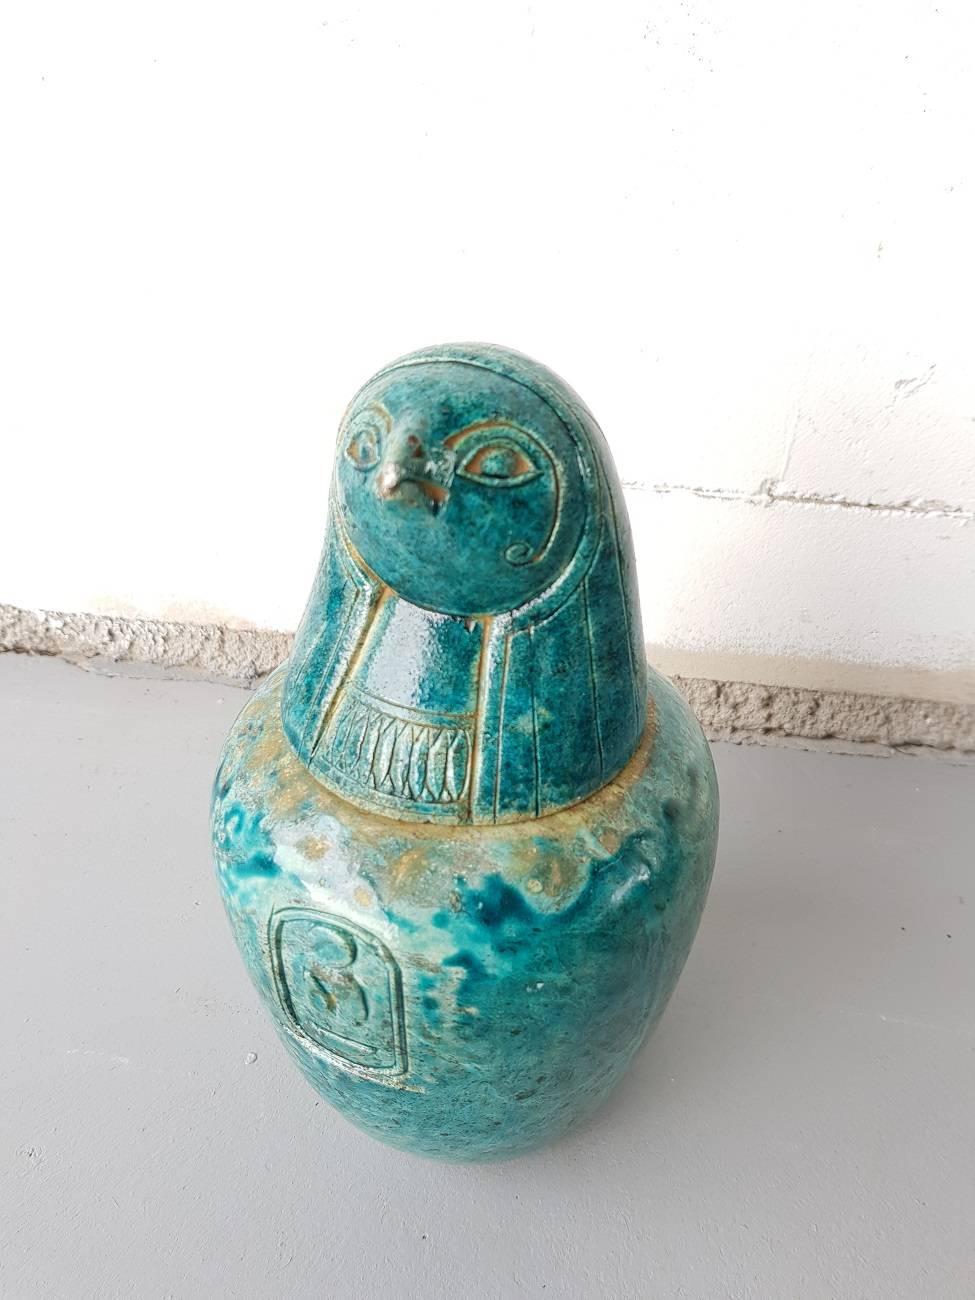 Beautiful blue faiance canopic jar from the 20th century depicting a falcon head the child of Horus Qebehsenuef for lower intestines in the style of the 19th century and later, bottom cover is inscribed with the number 13 in Persian.

The